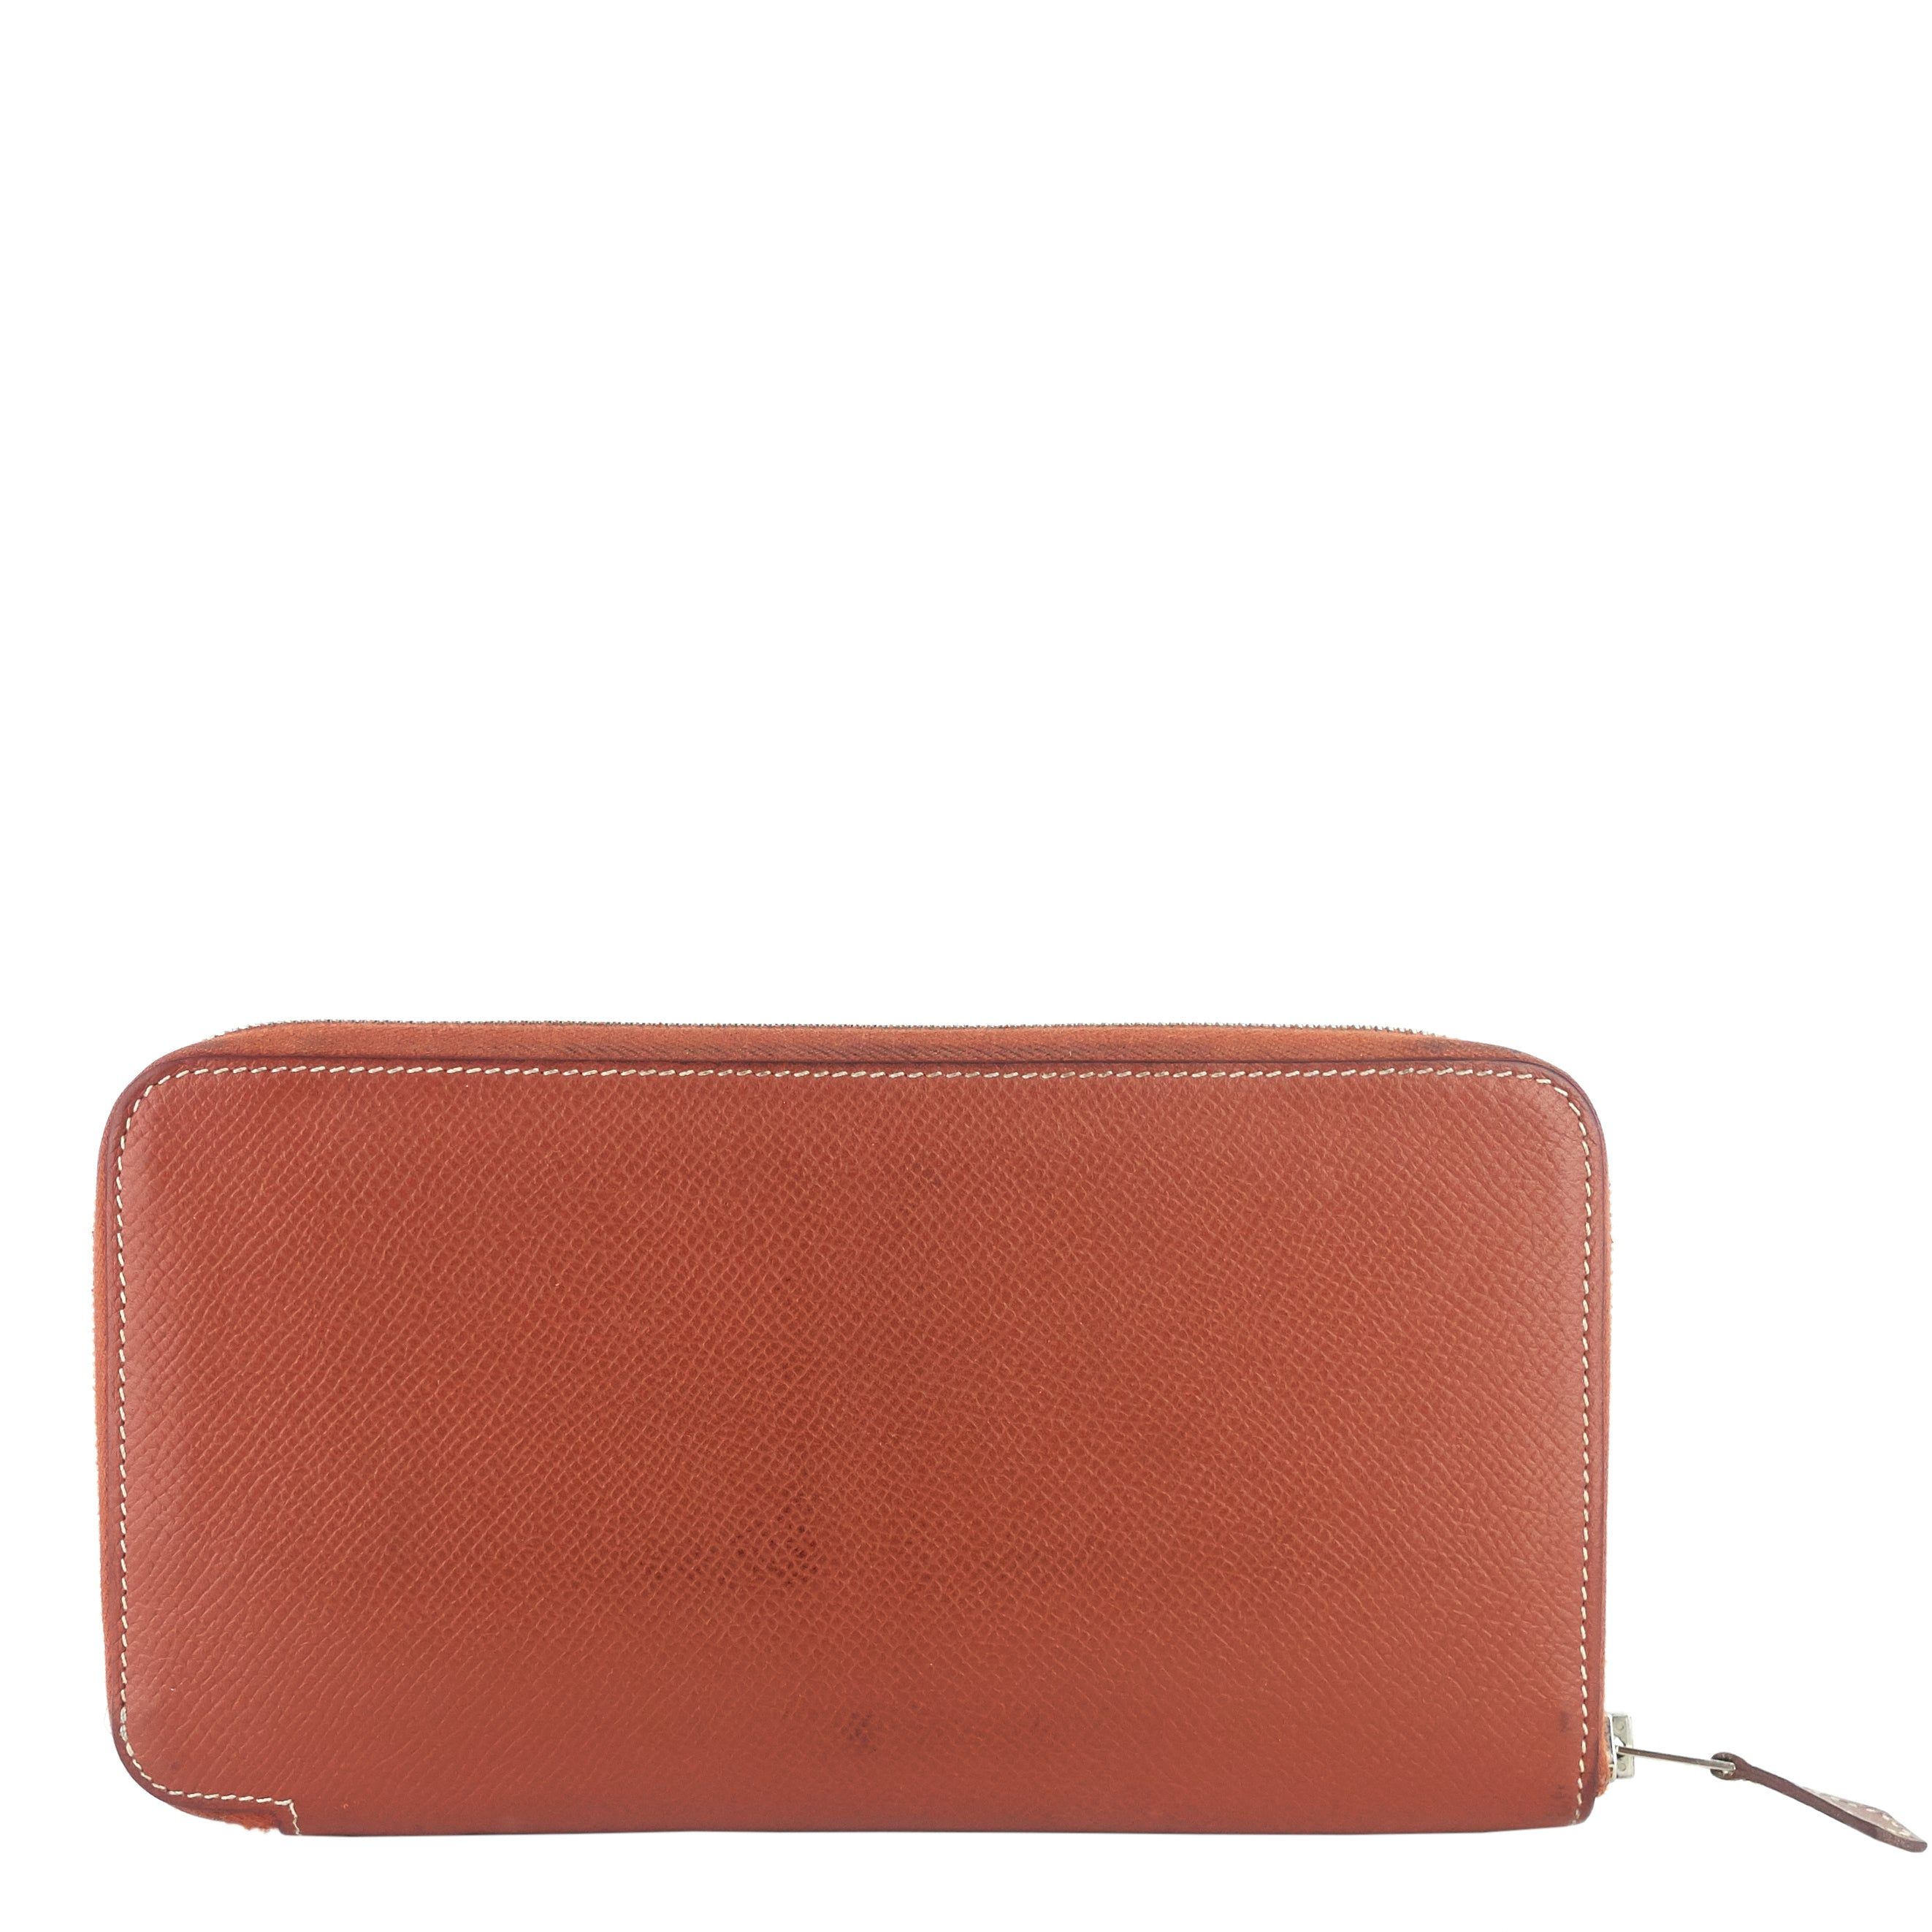 image of Hermes Silk'in Classique Long Epsom Leather Wallet in Brown, Women's